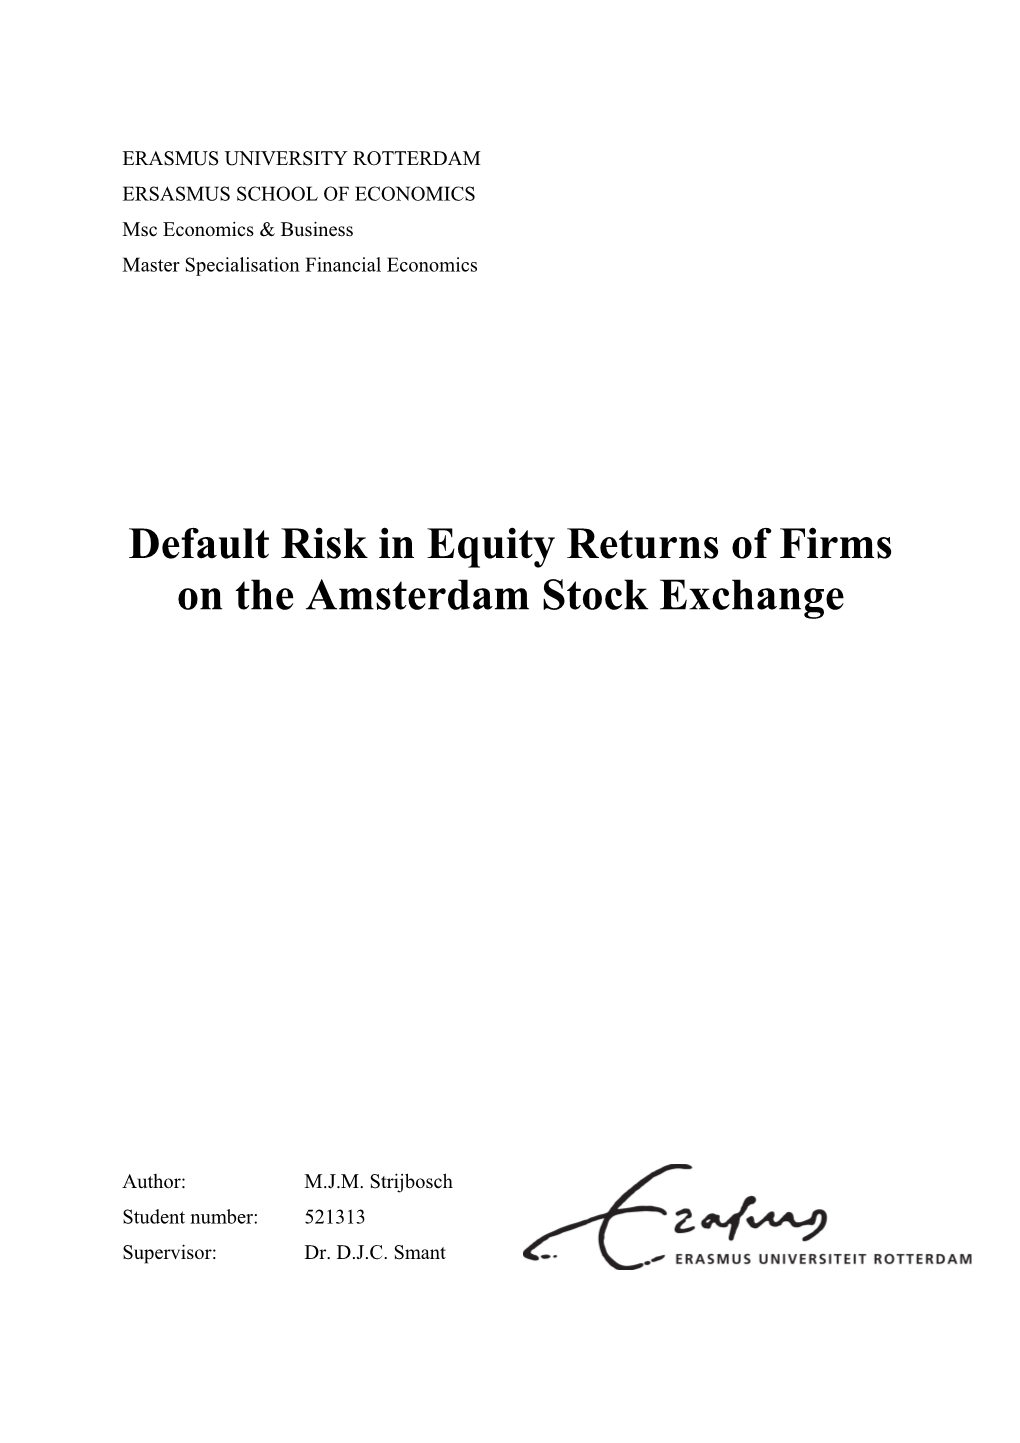 Default Risk in Equity Returns in Firms on the Amsterdam Stock Exchange